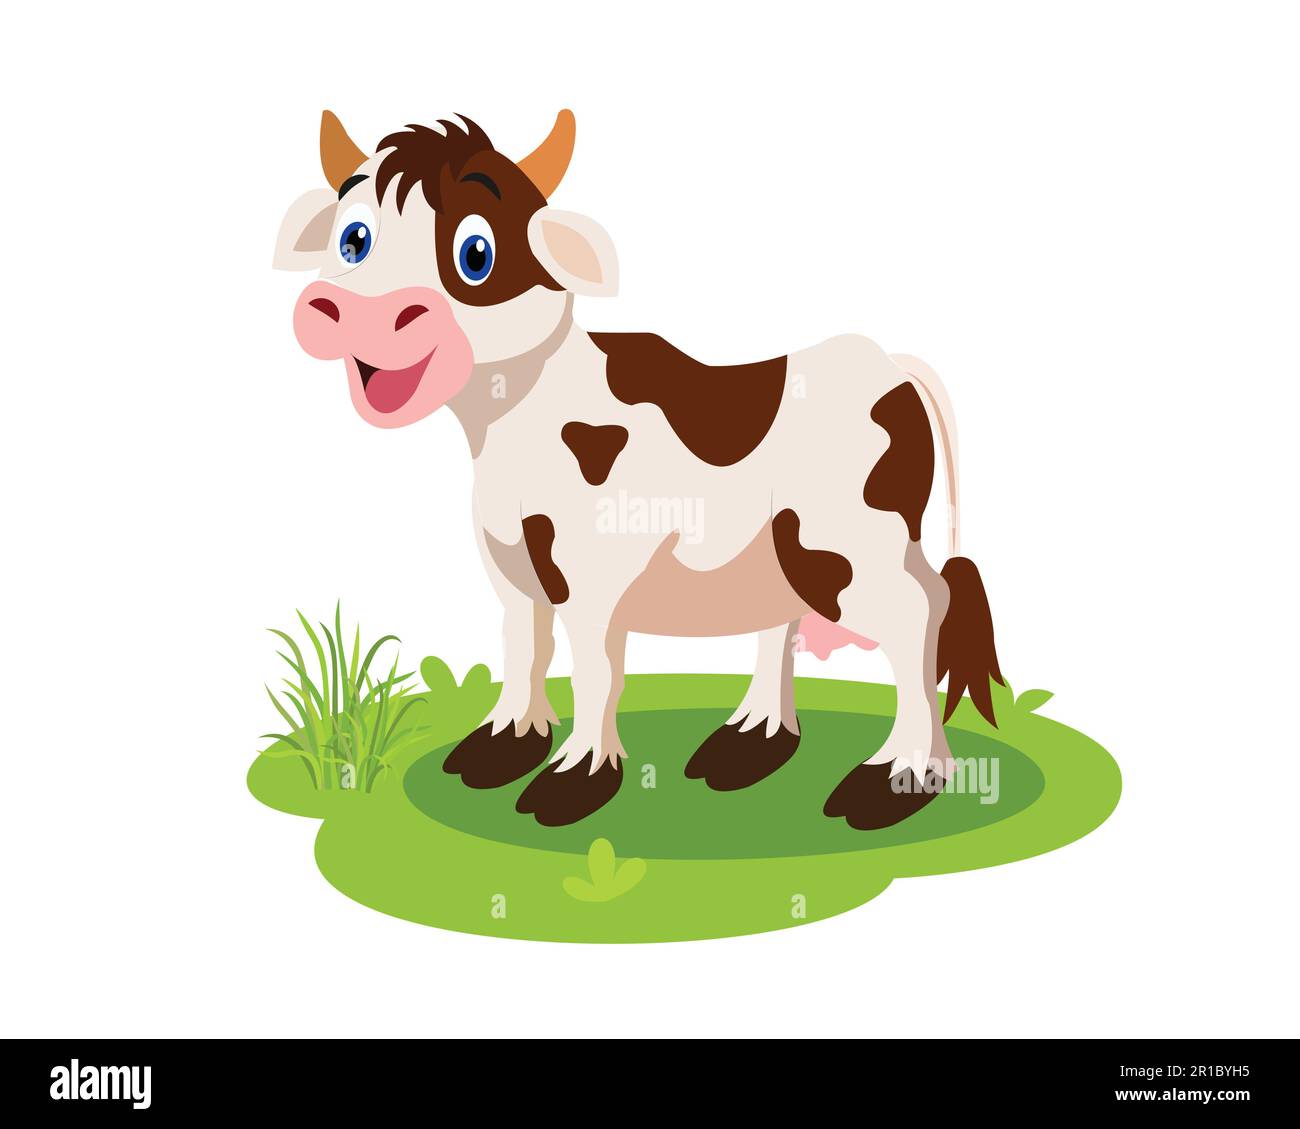 Cute Cartoon cow standing on grass. Hand drawn vector image of Cow on white background. Isolate the image from background and use for children alphabe Stock Vector